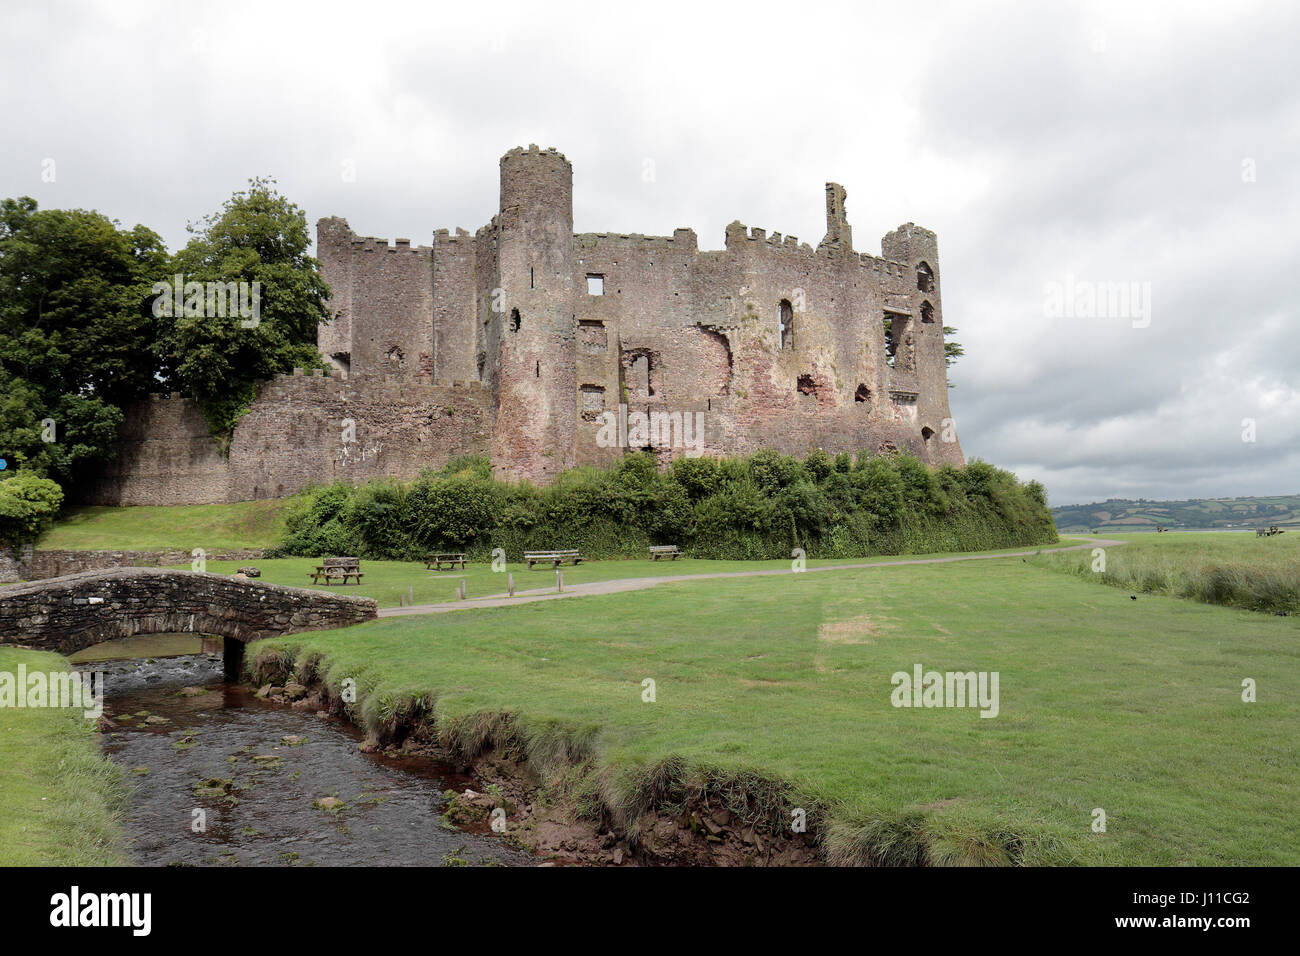 Laugharne Castle in Laugharne, Dyfed, Wales. Stockfoto